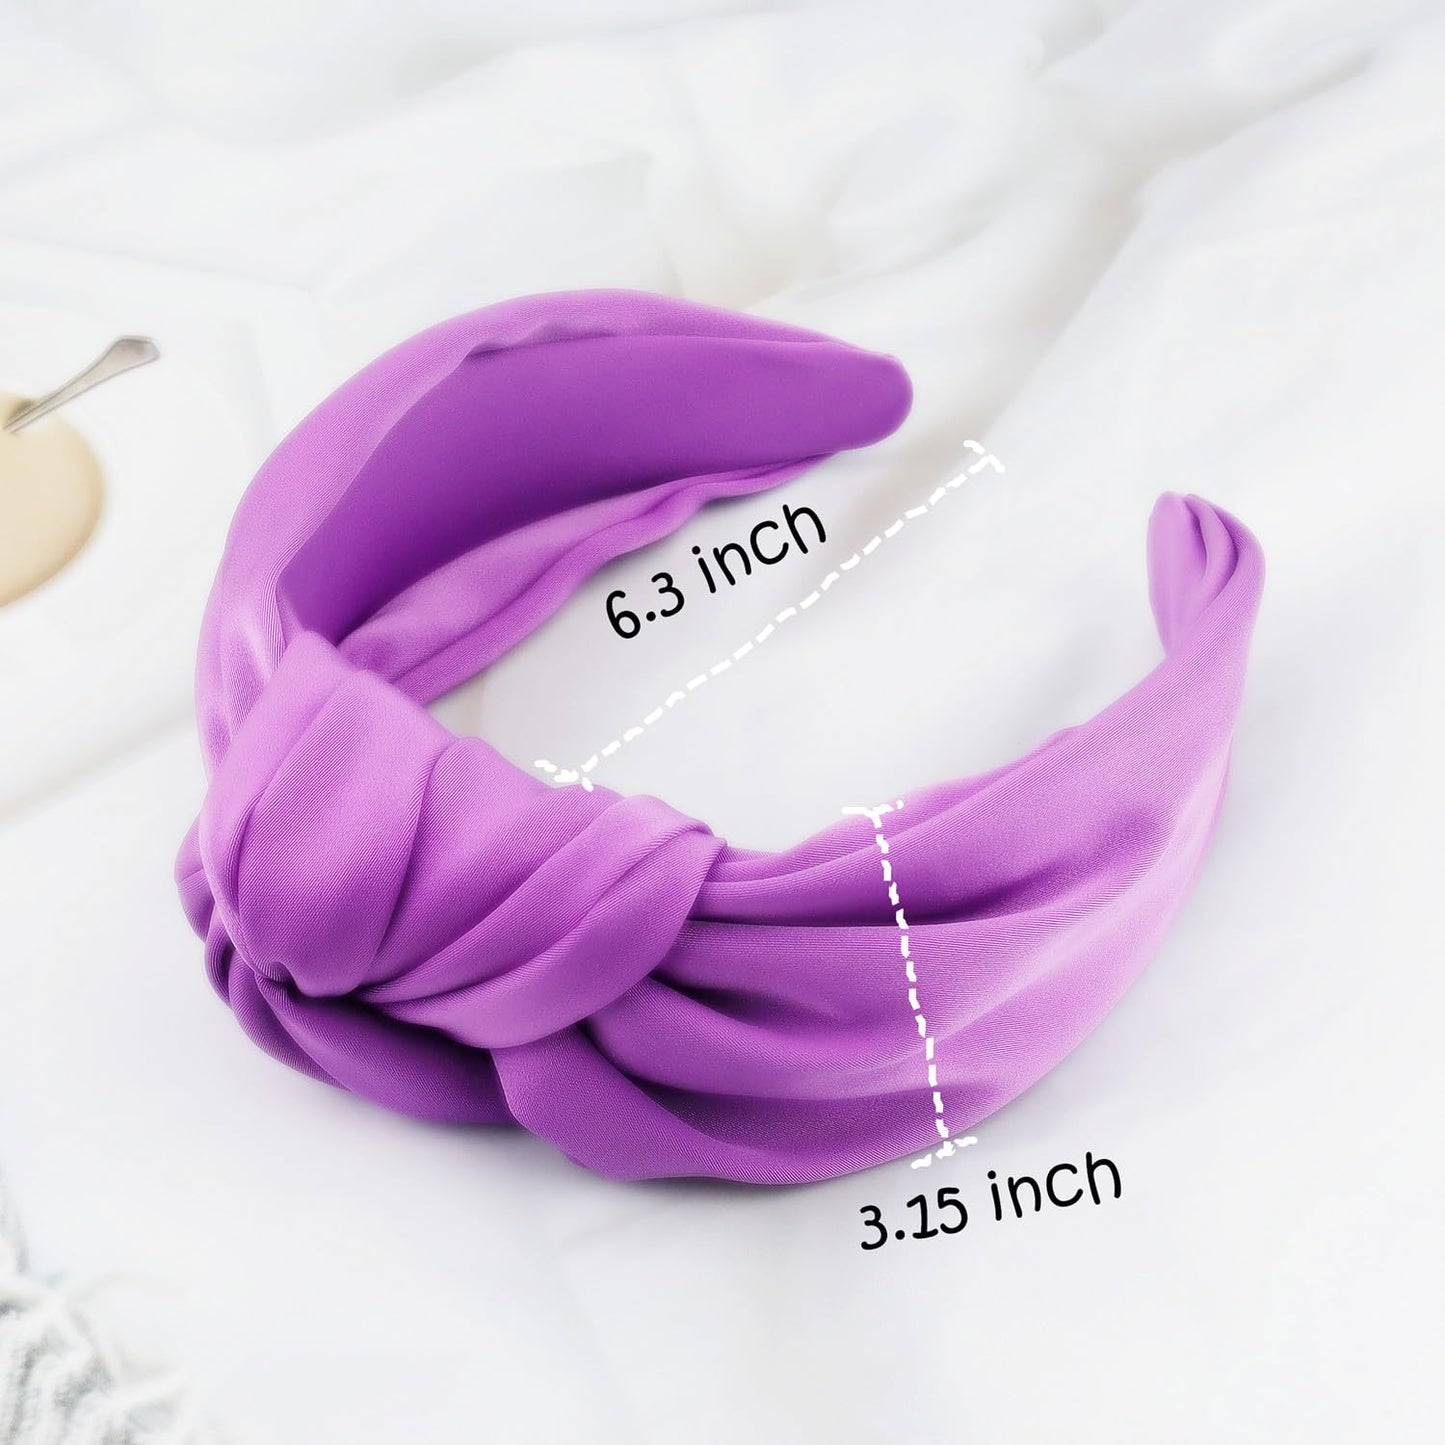 JOYRUBY Purple Headband Knot Headband for Women, Wide Headbands Non Slip Top Knotted Headbands for Women Girls Satin Solid Colors Head Bands for Women's Hair Fashion Hair Accessories